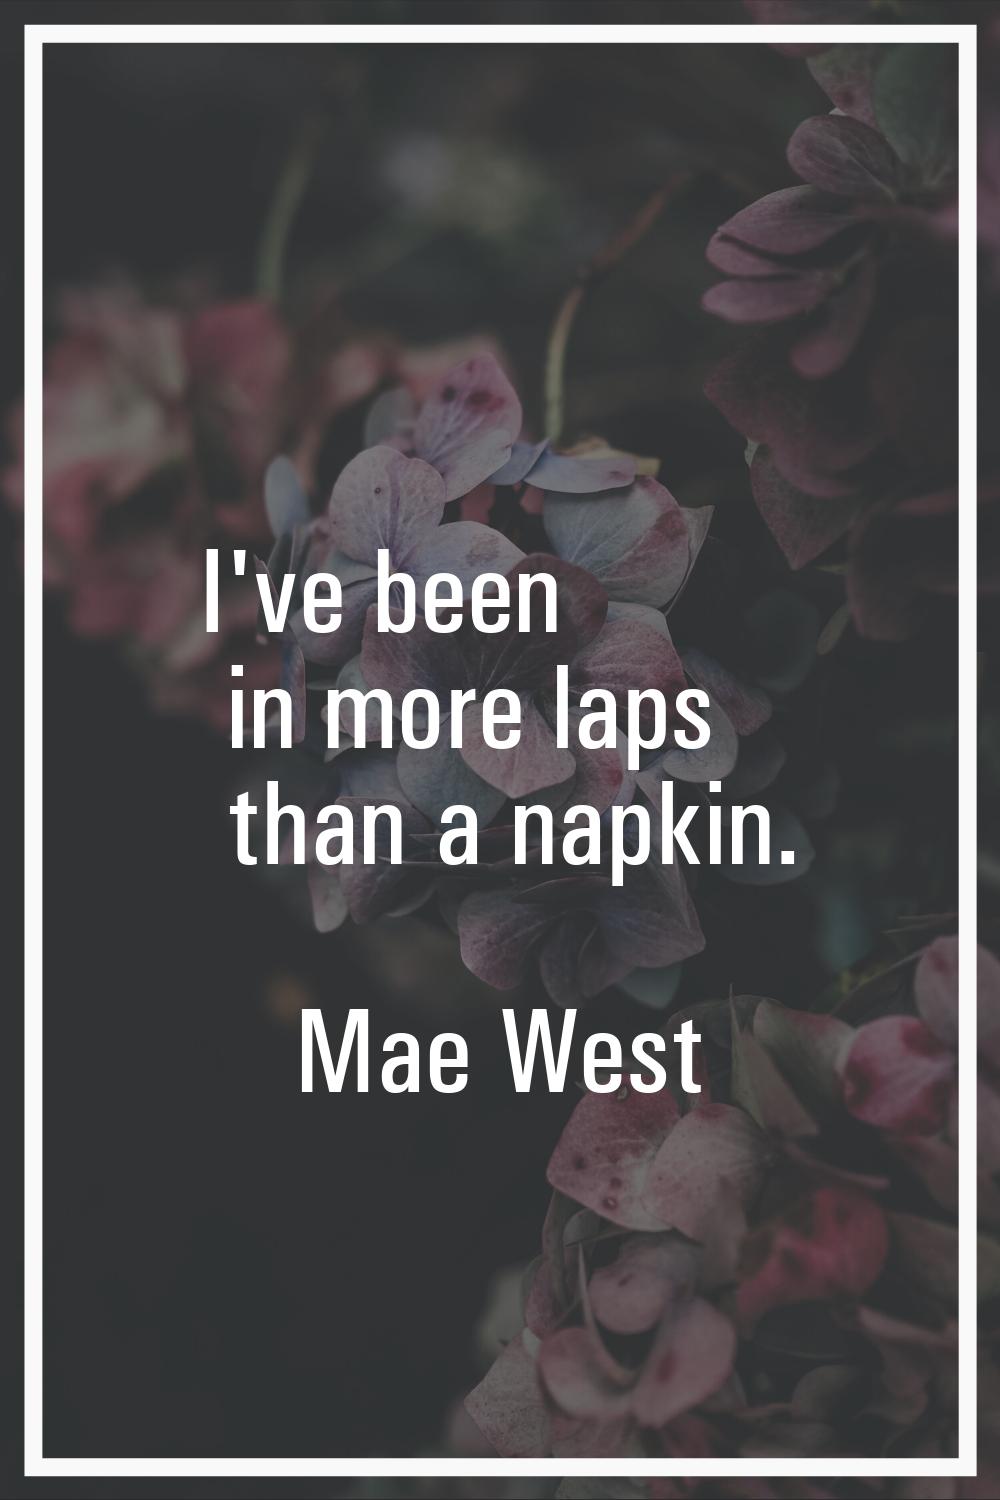 I've been in more laps than a napkin.